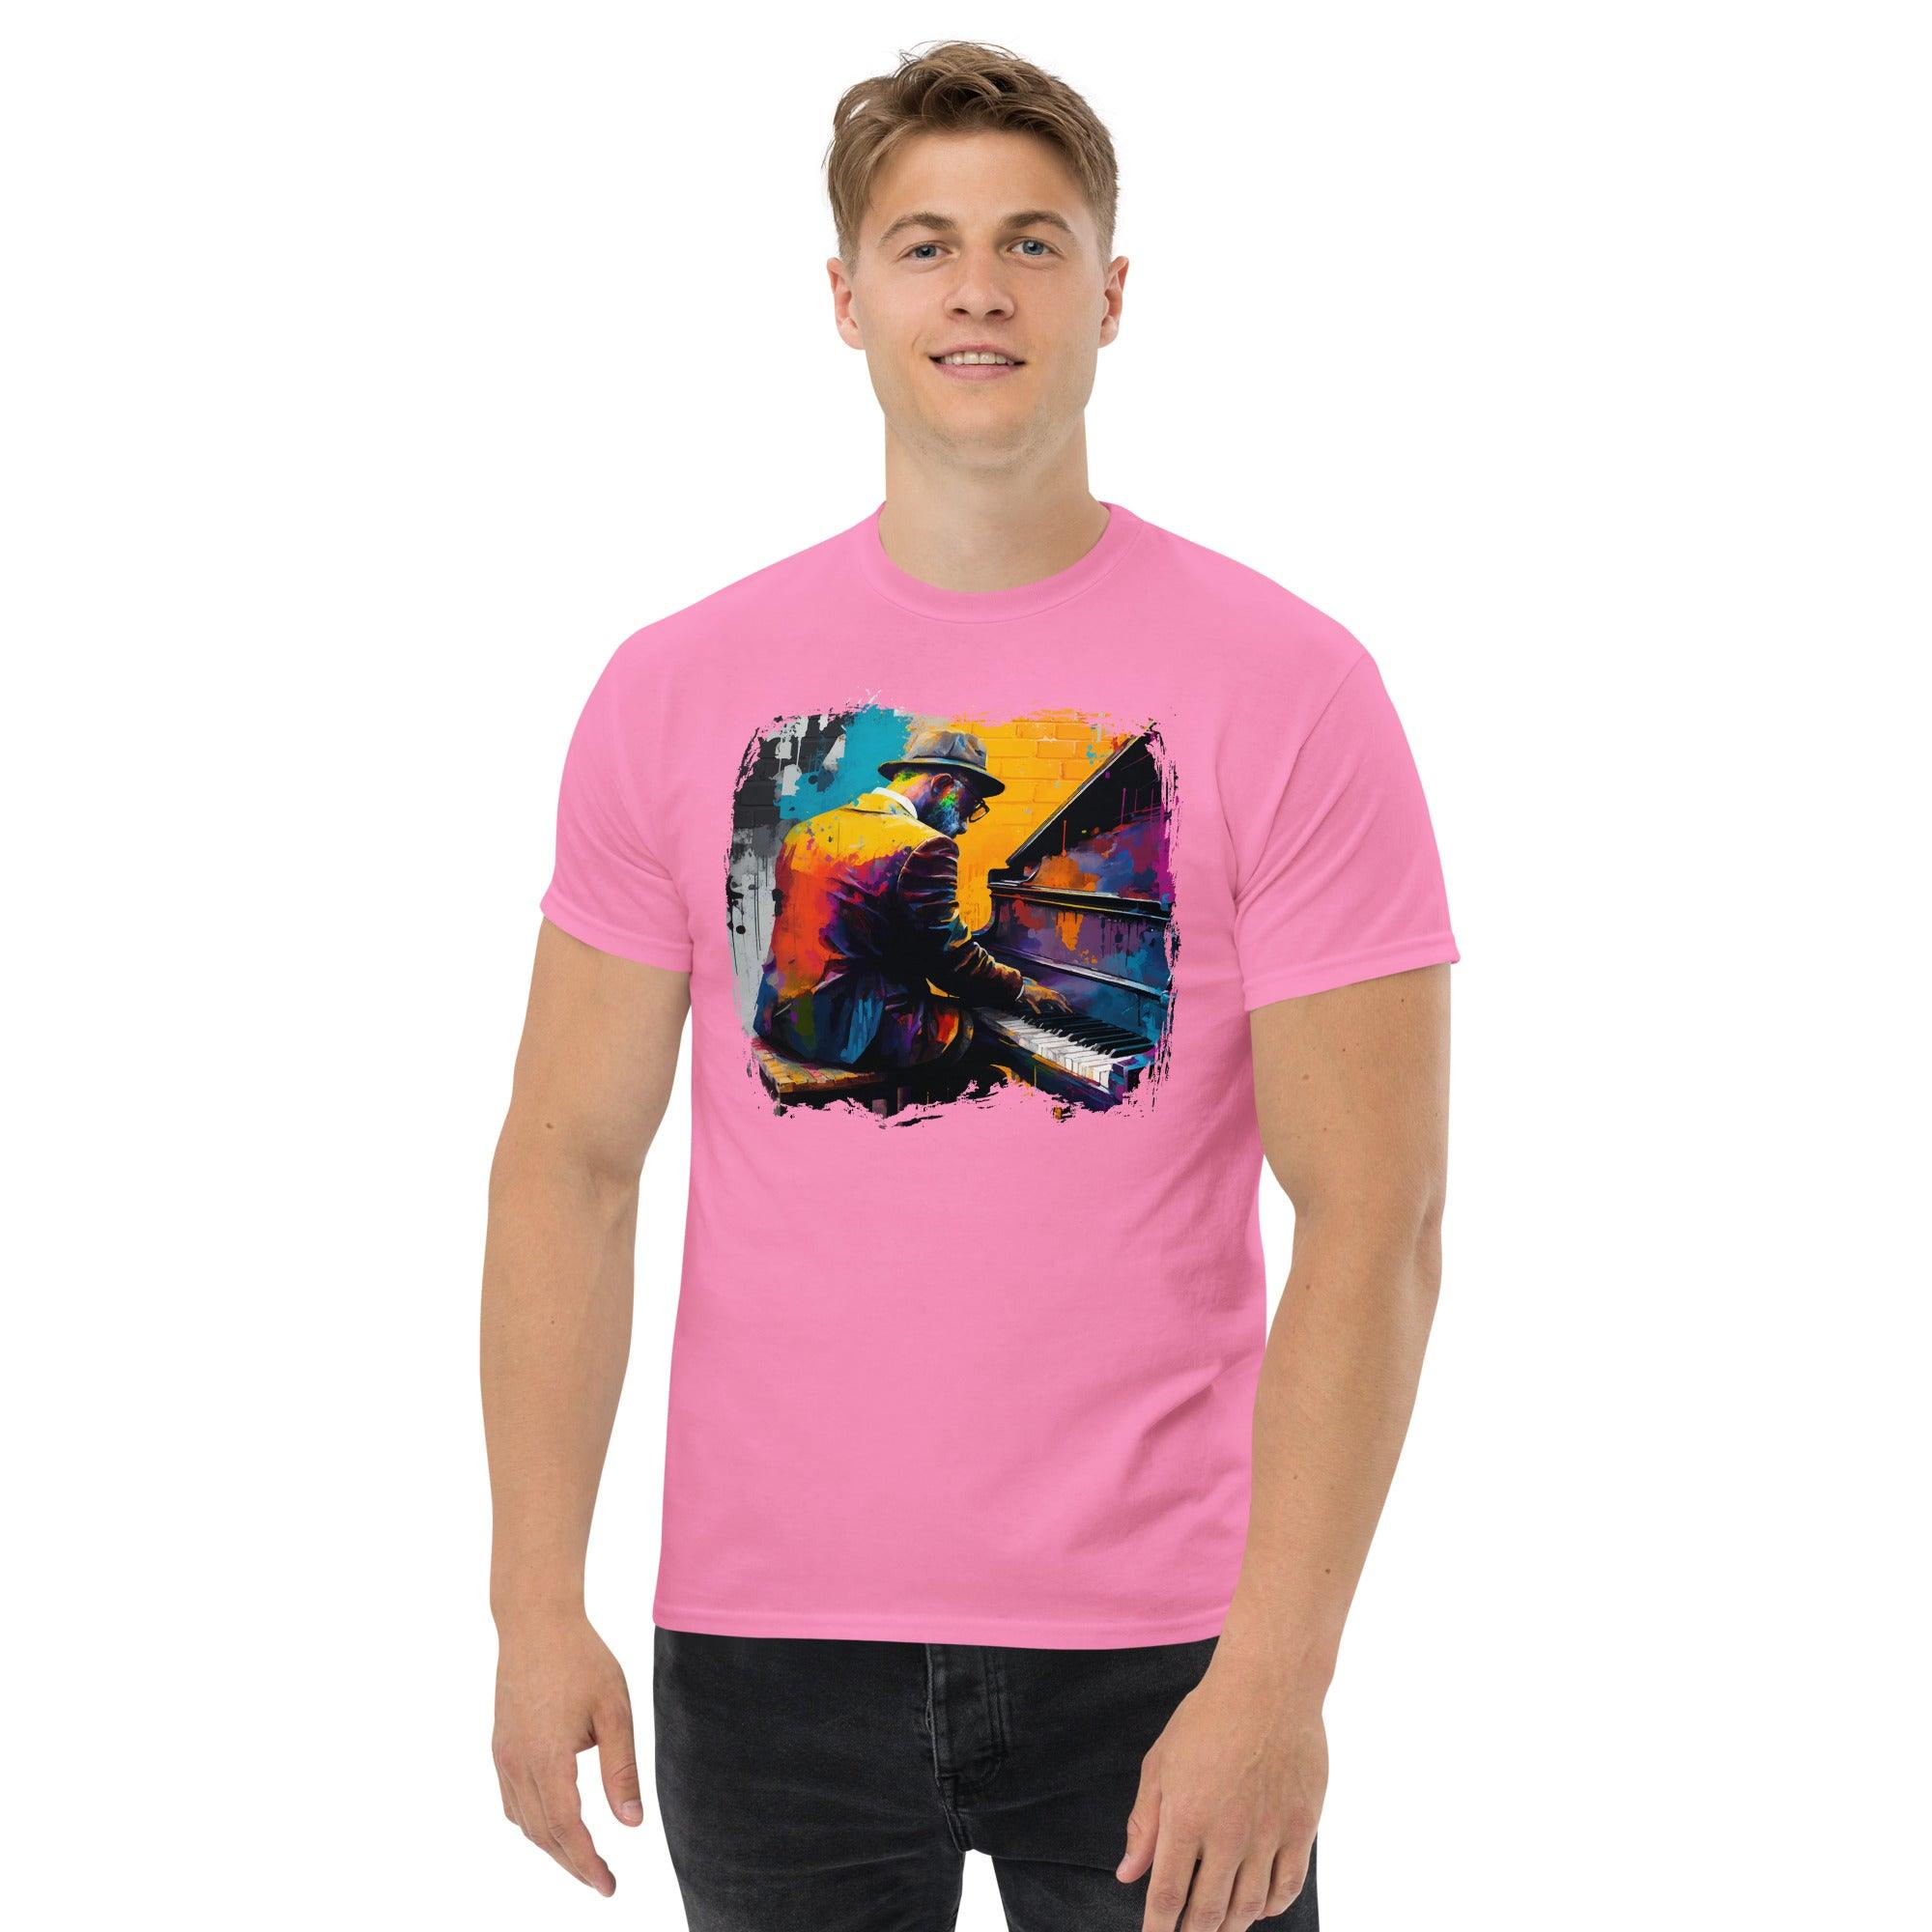 Noodling On The Keyboard Men's Classic Tee - Beyond T-shirts